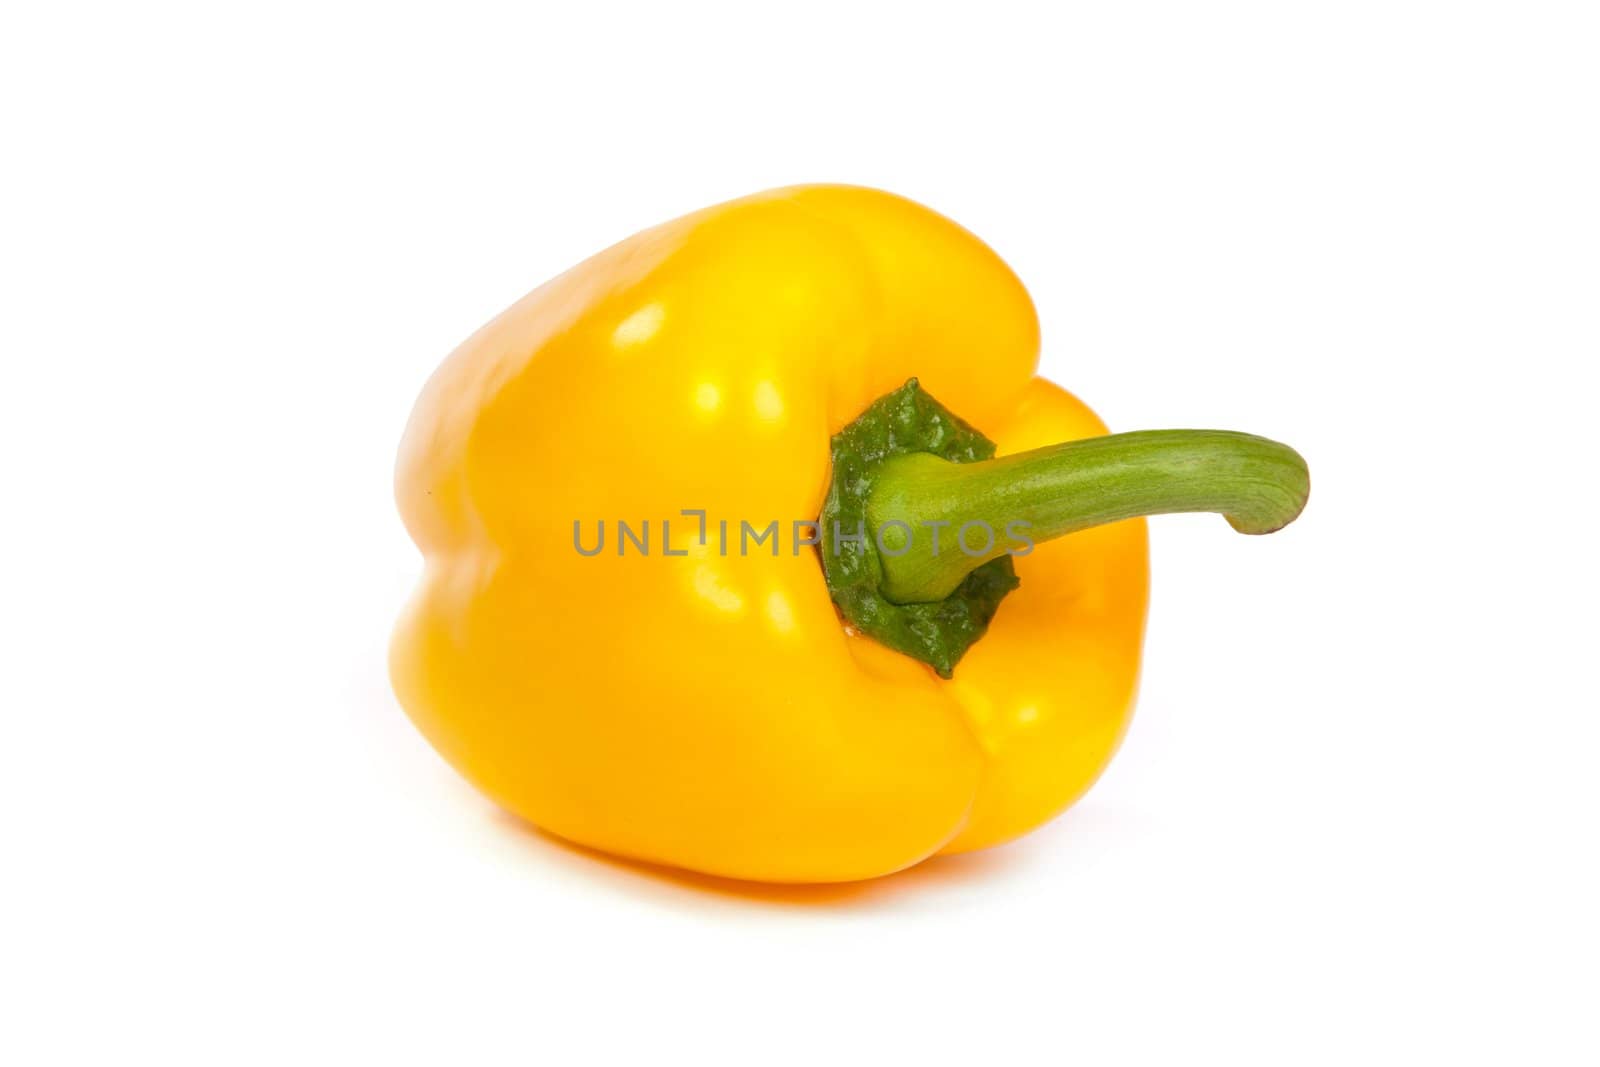 A yellow bell sweet pepper isolated on plain white background.